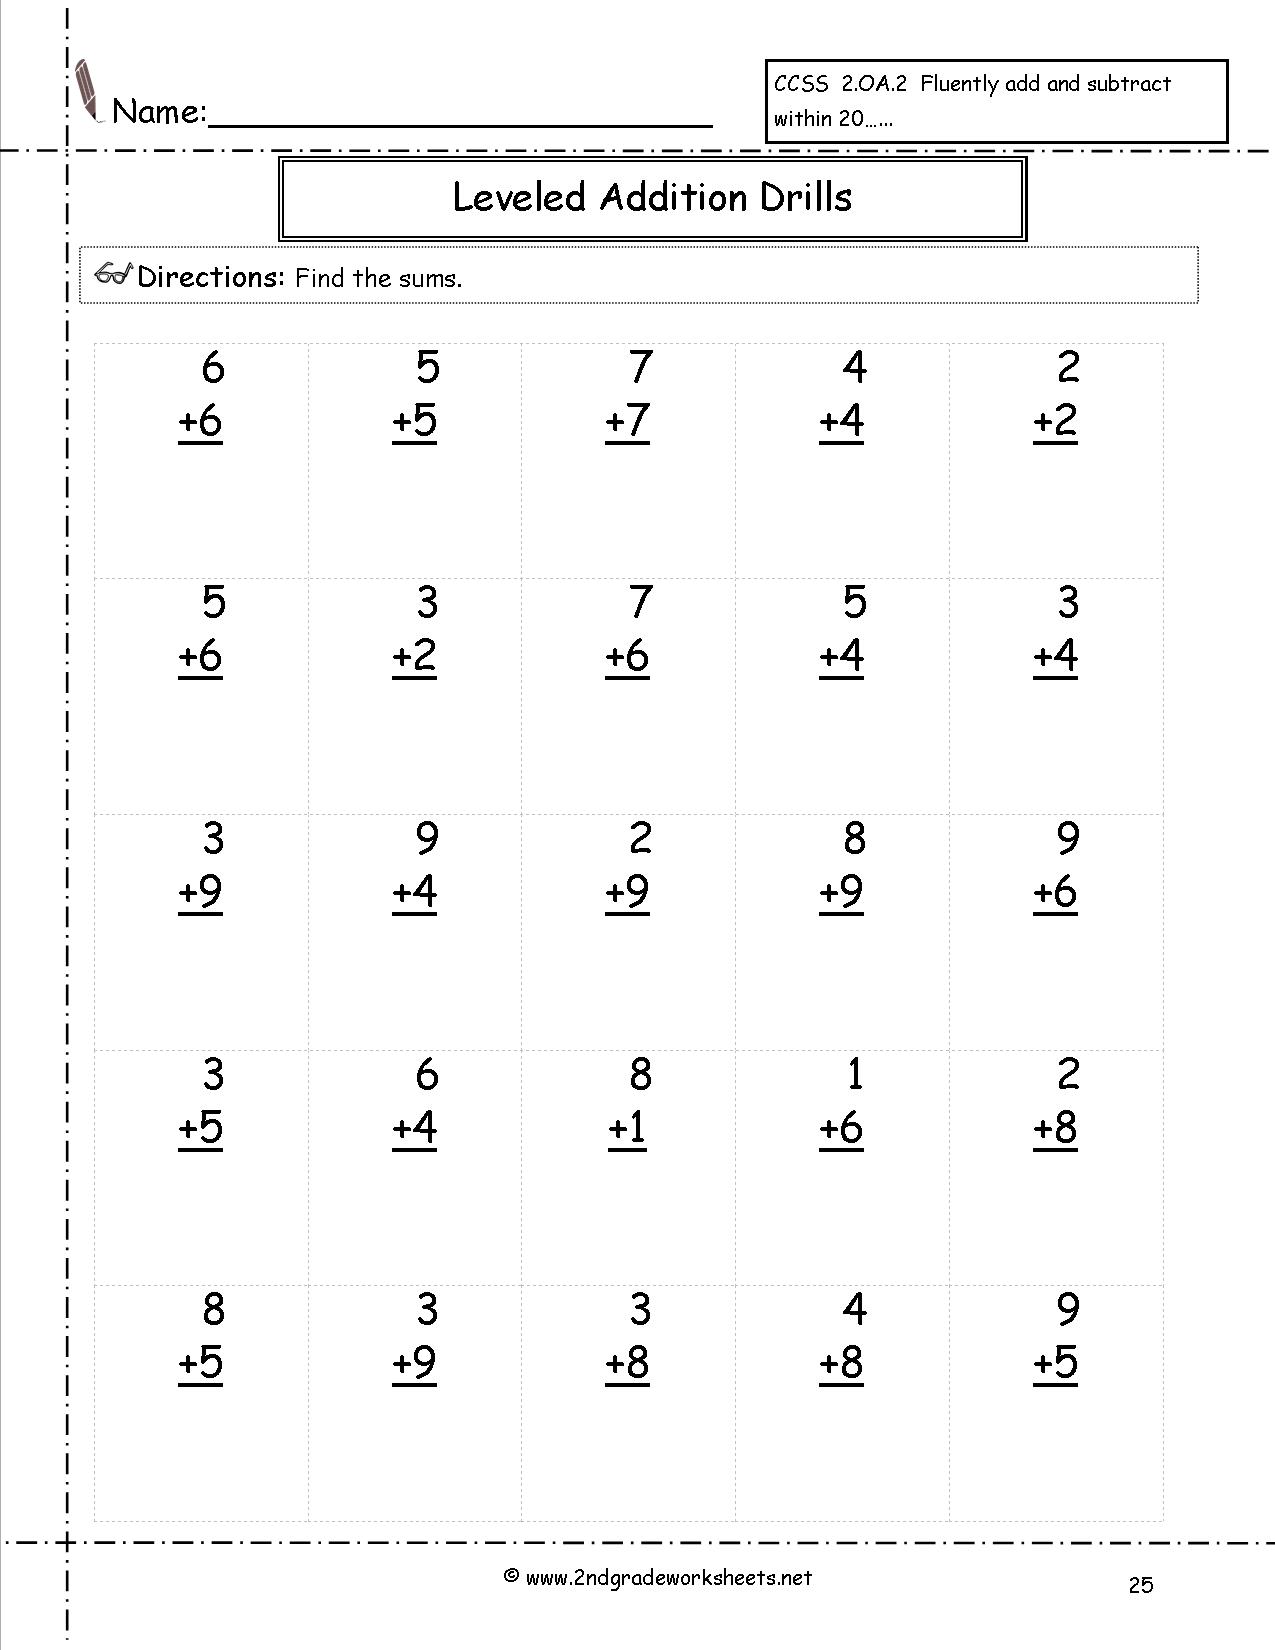 15-best-images-of-single-addition-and-subtraction-worksheets-single